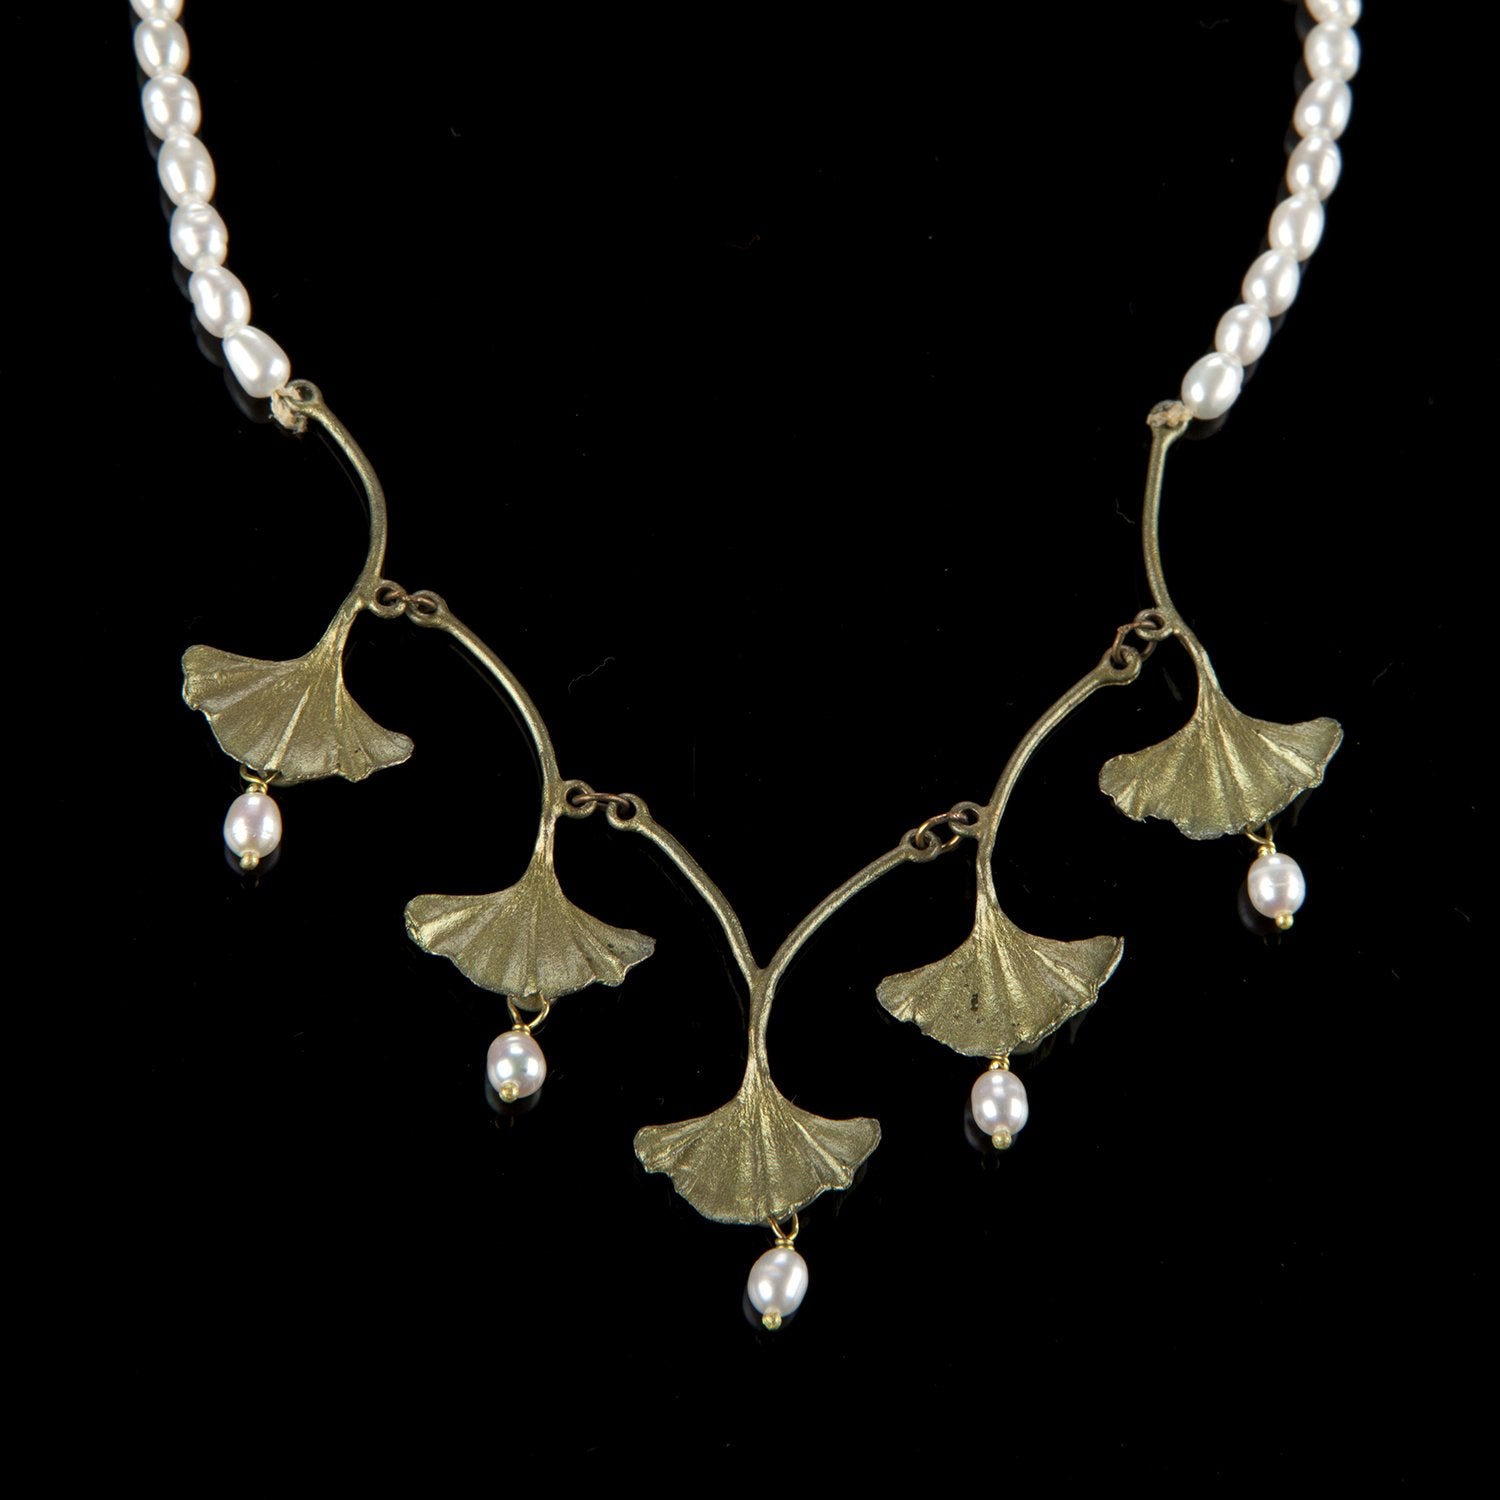 Ginkgo Necklace - Pearl Drops